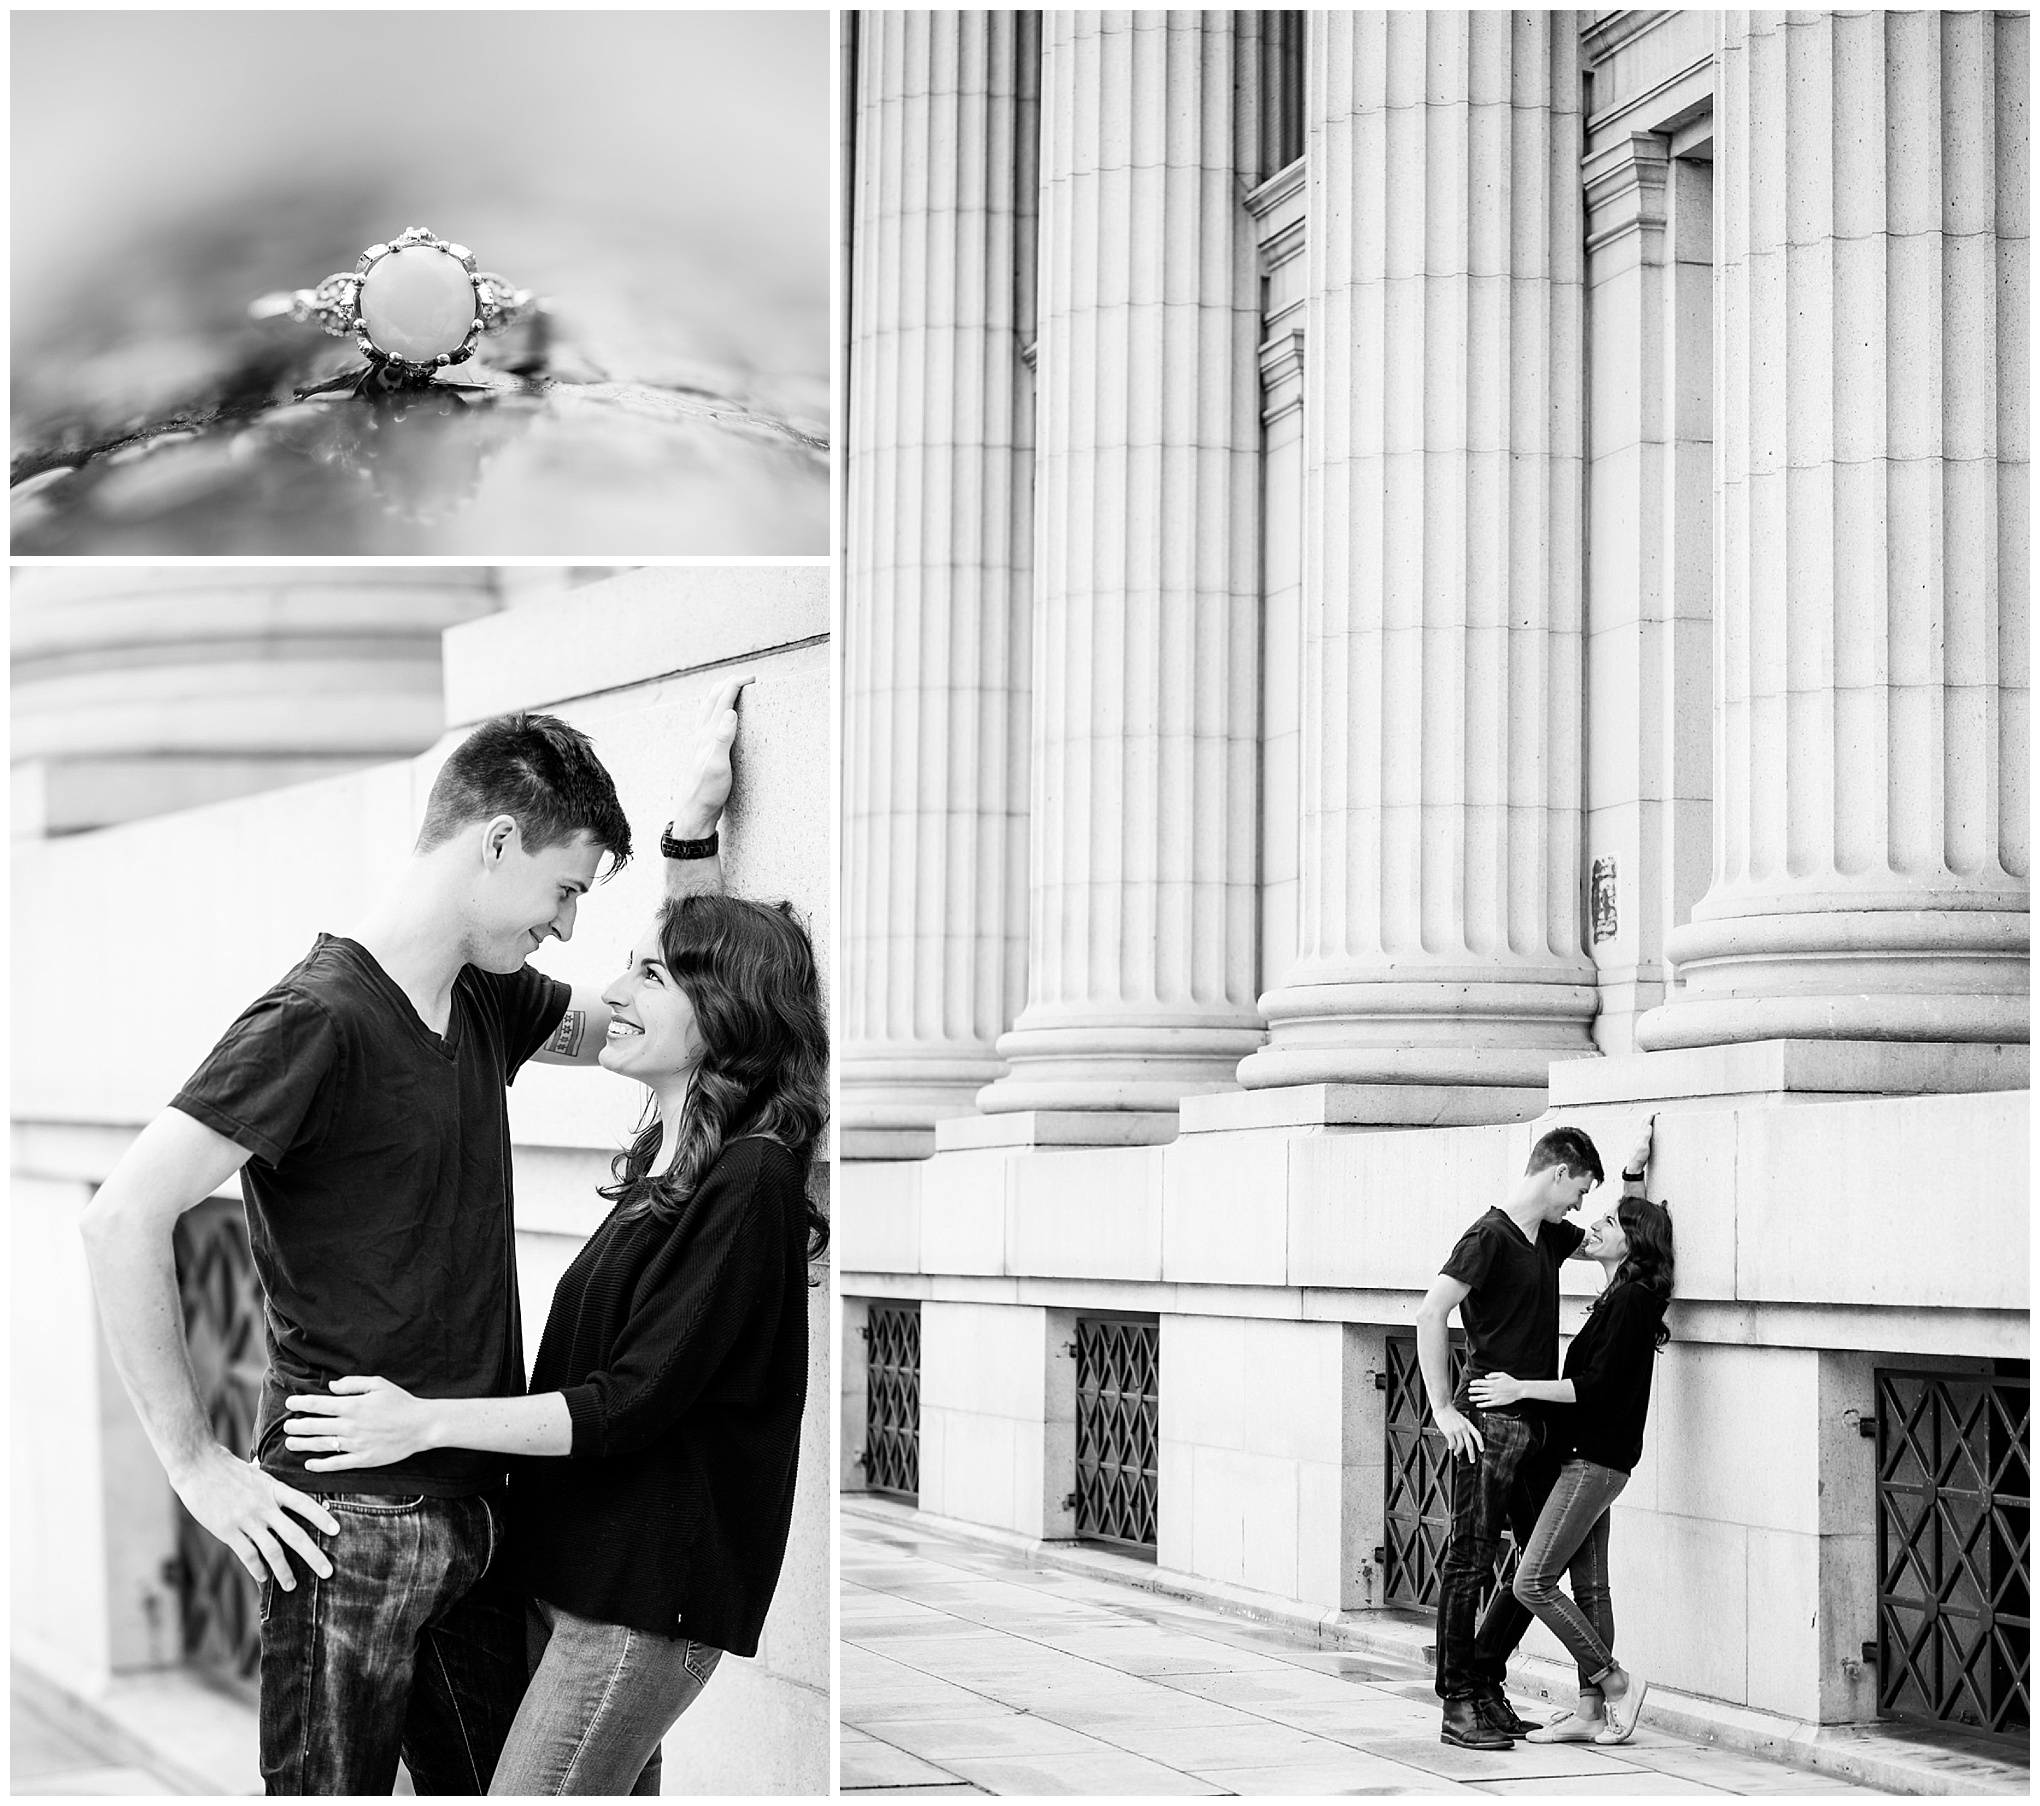 black and white engagement photos, black and white photography, black and white photos, engagement photos, black and white D.C., D.C. engagement photos, classic engagement photos, traditional engagement photos, engagement photos poses, classic architecture, D.C. architecture, Union Station D.C., Union Station, engaged couple, relationship goals, joyful couple, black and white sessions, Postal Museum, couple kissing, couple leaning on wall, opal engagement ring